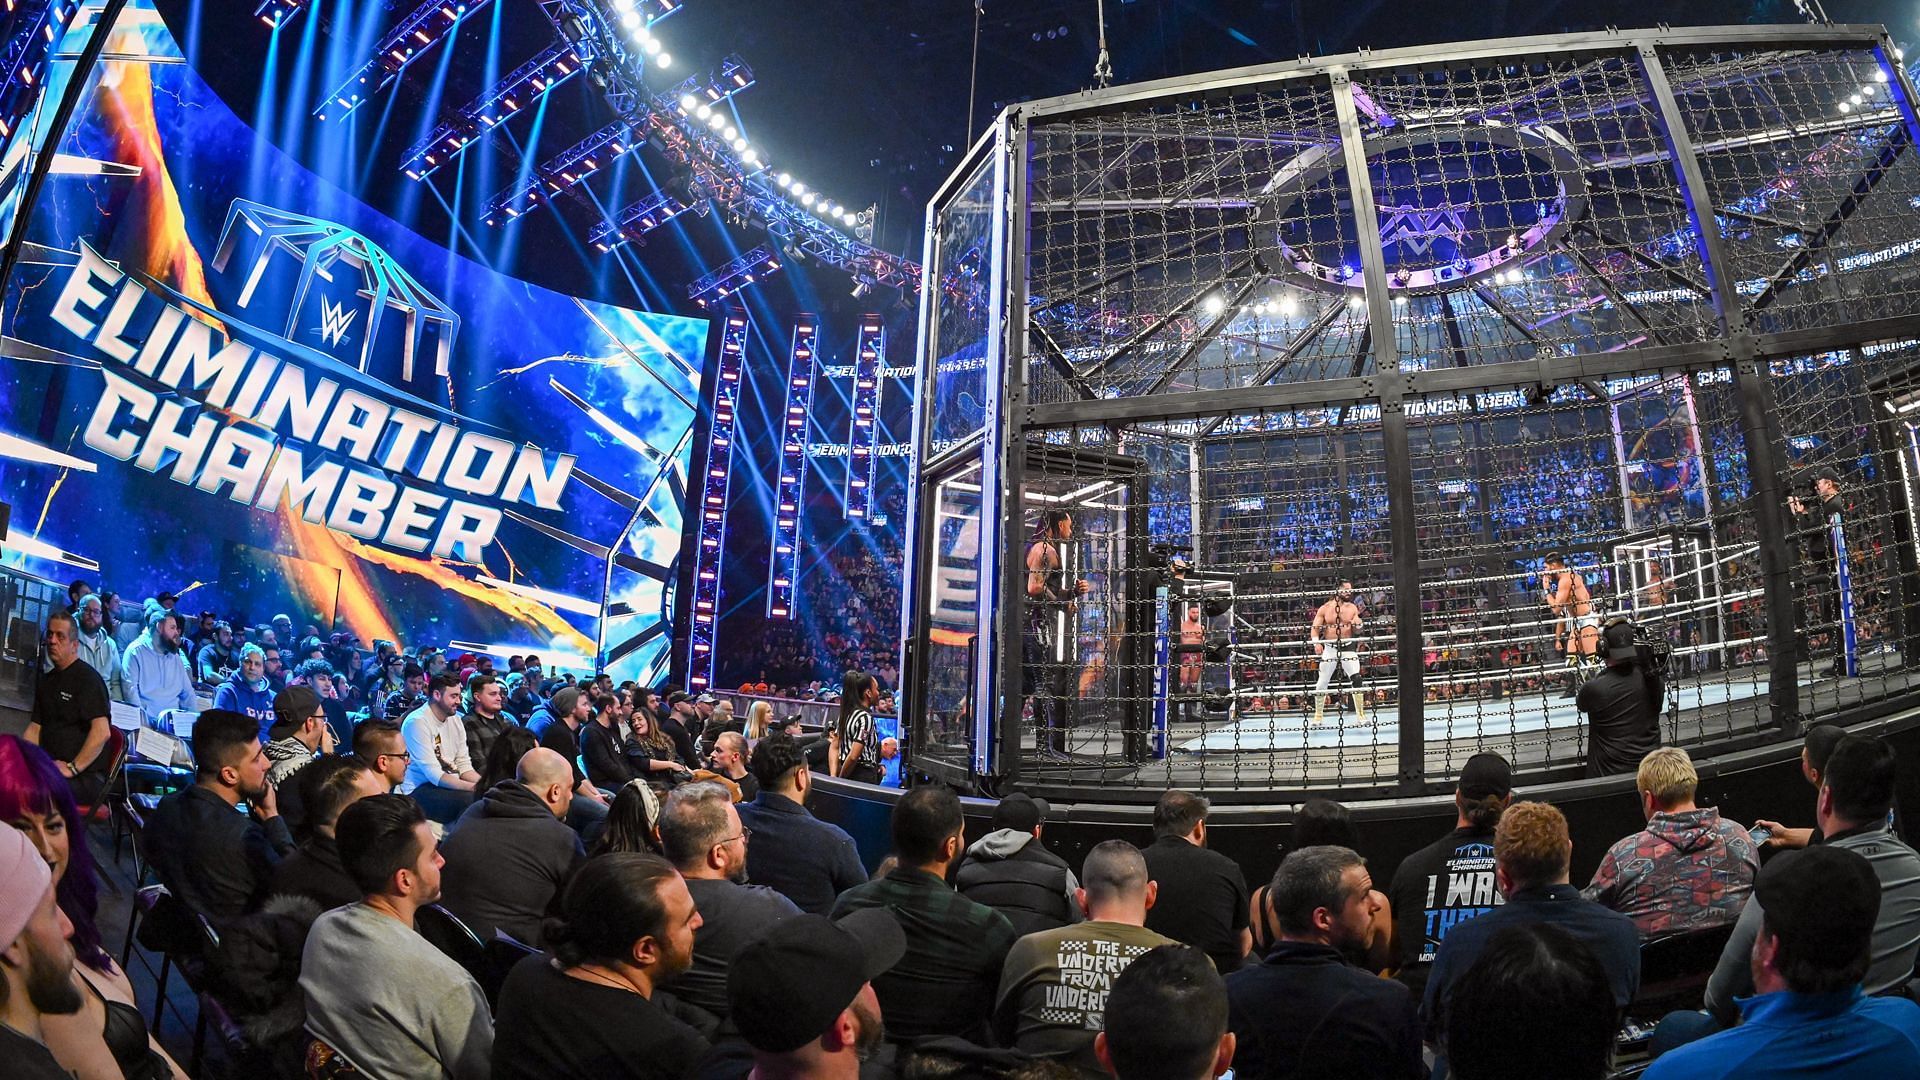 The Elimination Chamber is the next WWE PLE.